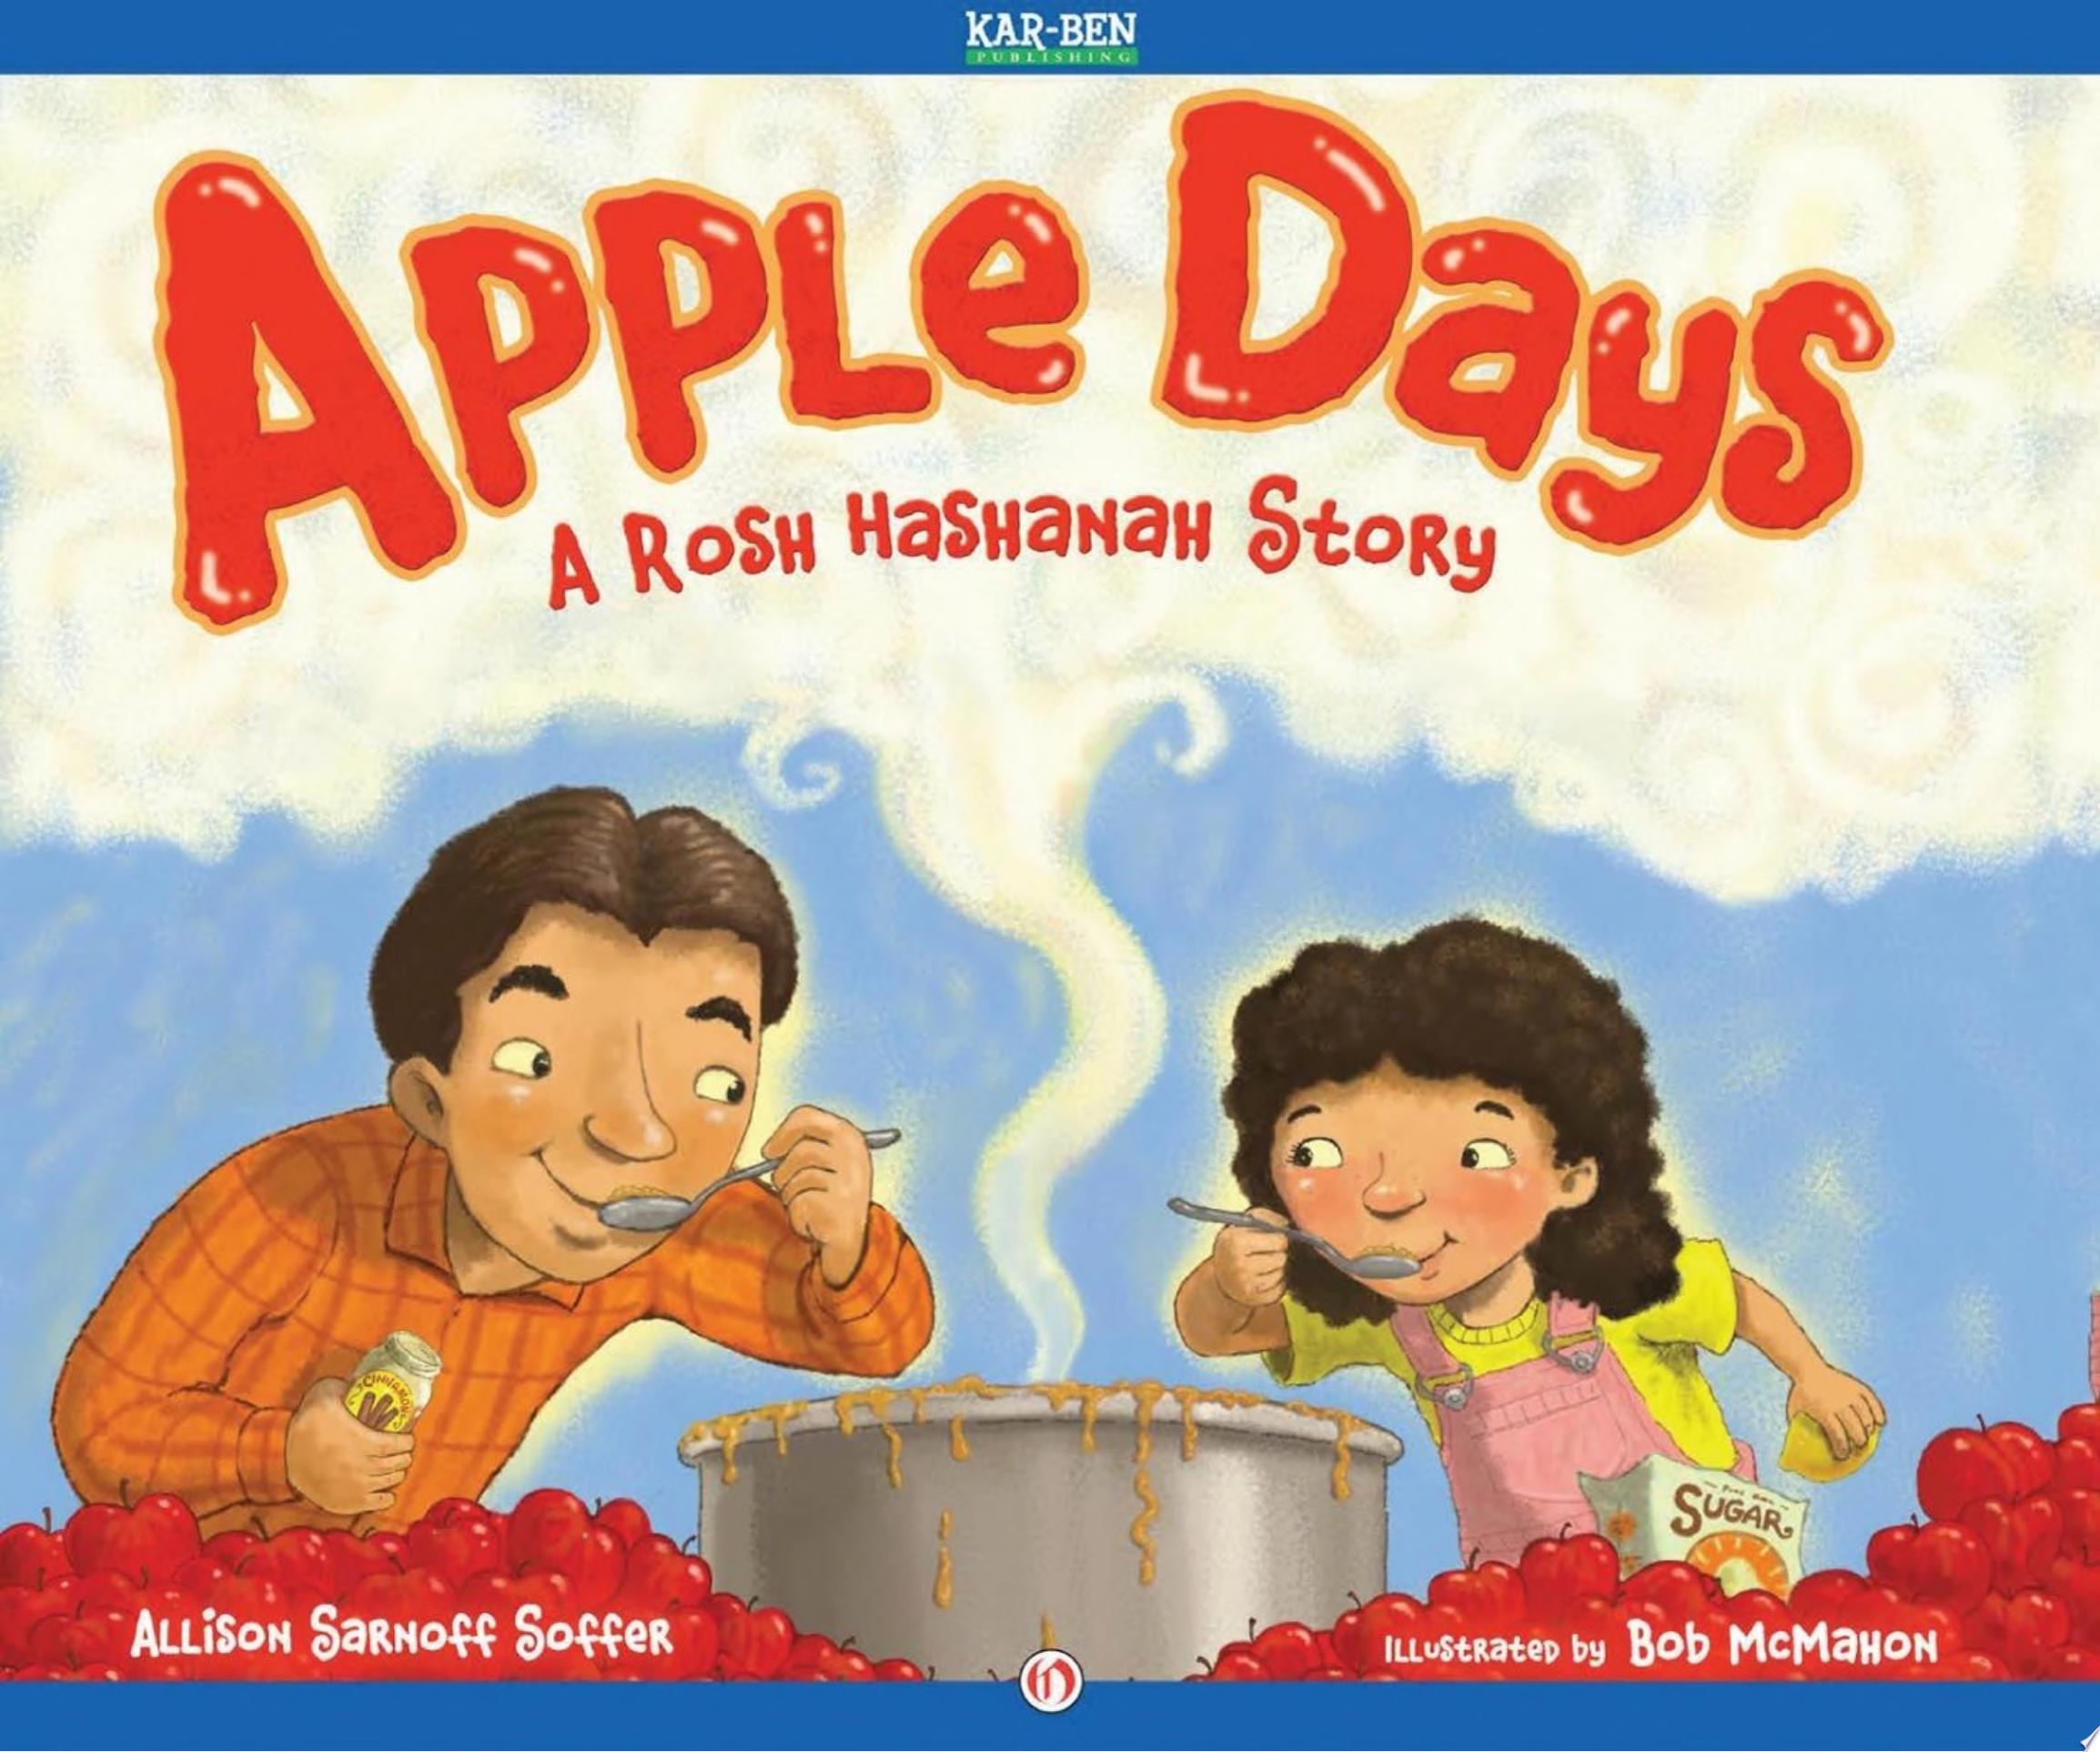 Image for "Apple Days"